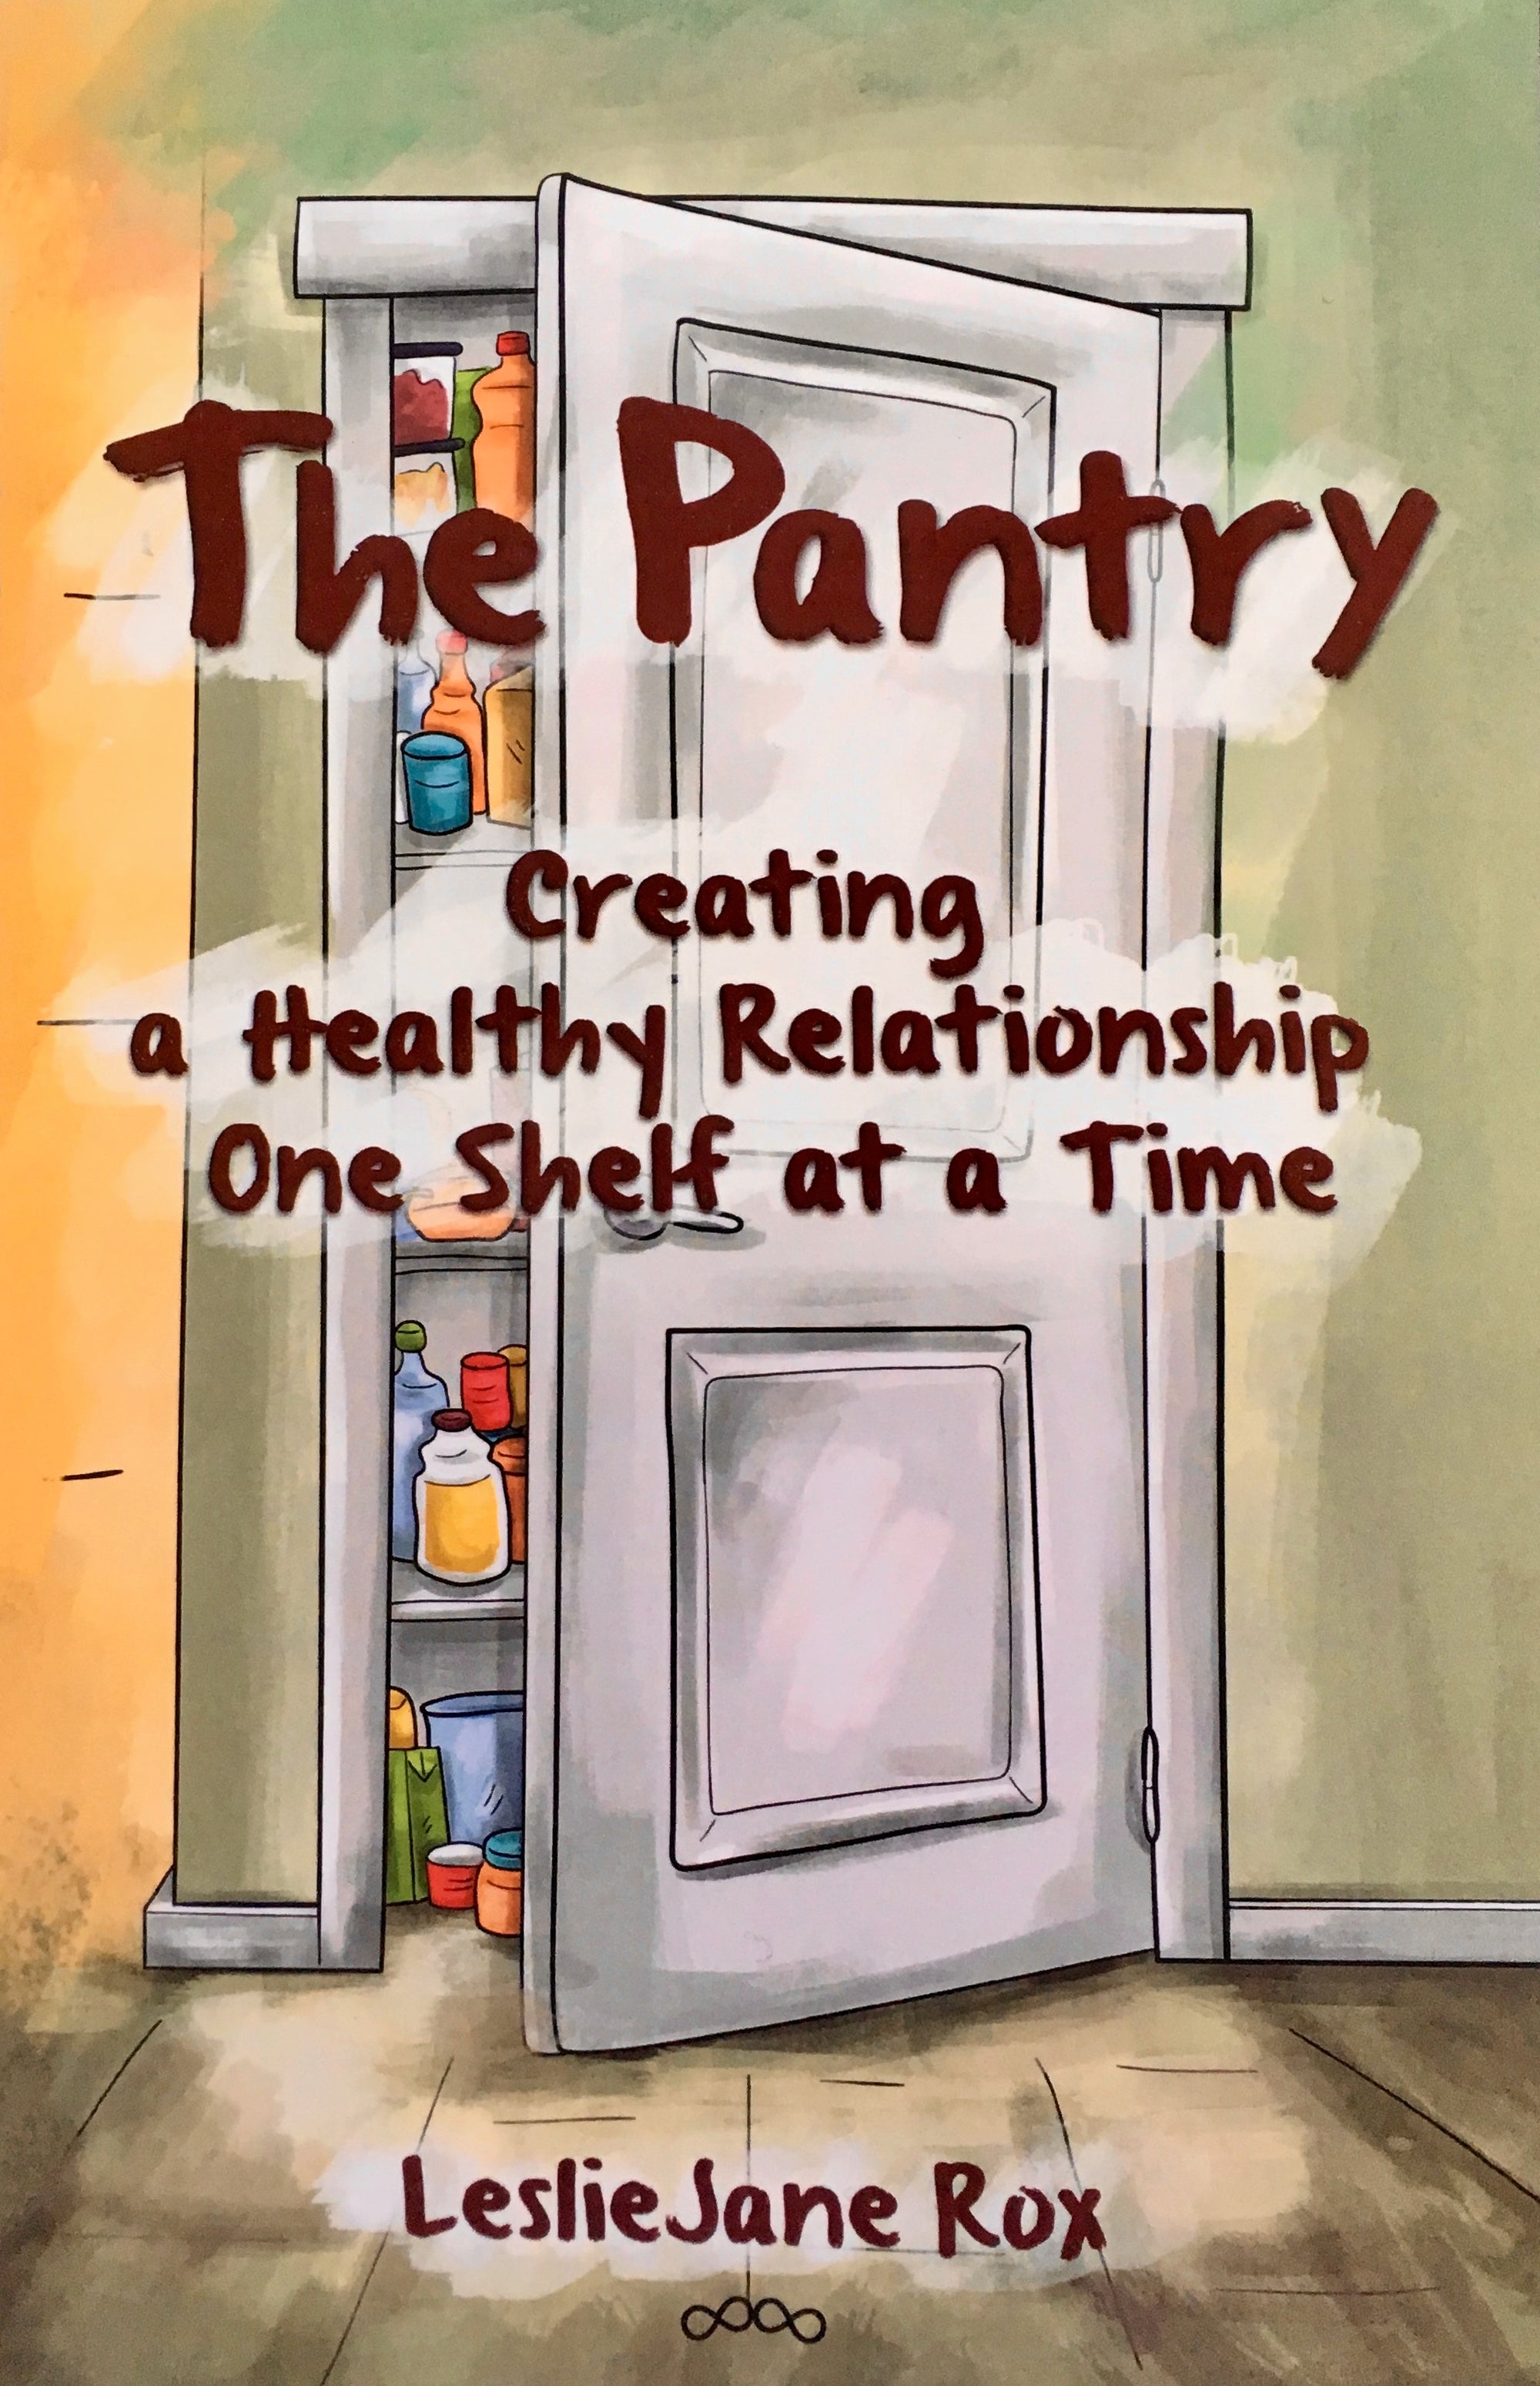 Dec 8, 1-3pm | Book Launch "The Pantry: Creating a Healthy Relationship One Shelf at a Time" by LeslieJaneRox